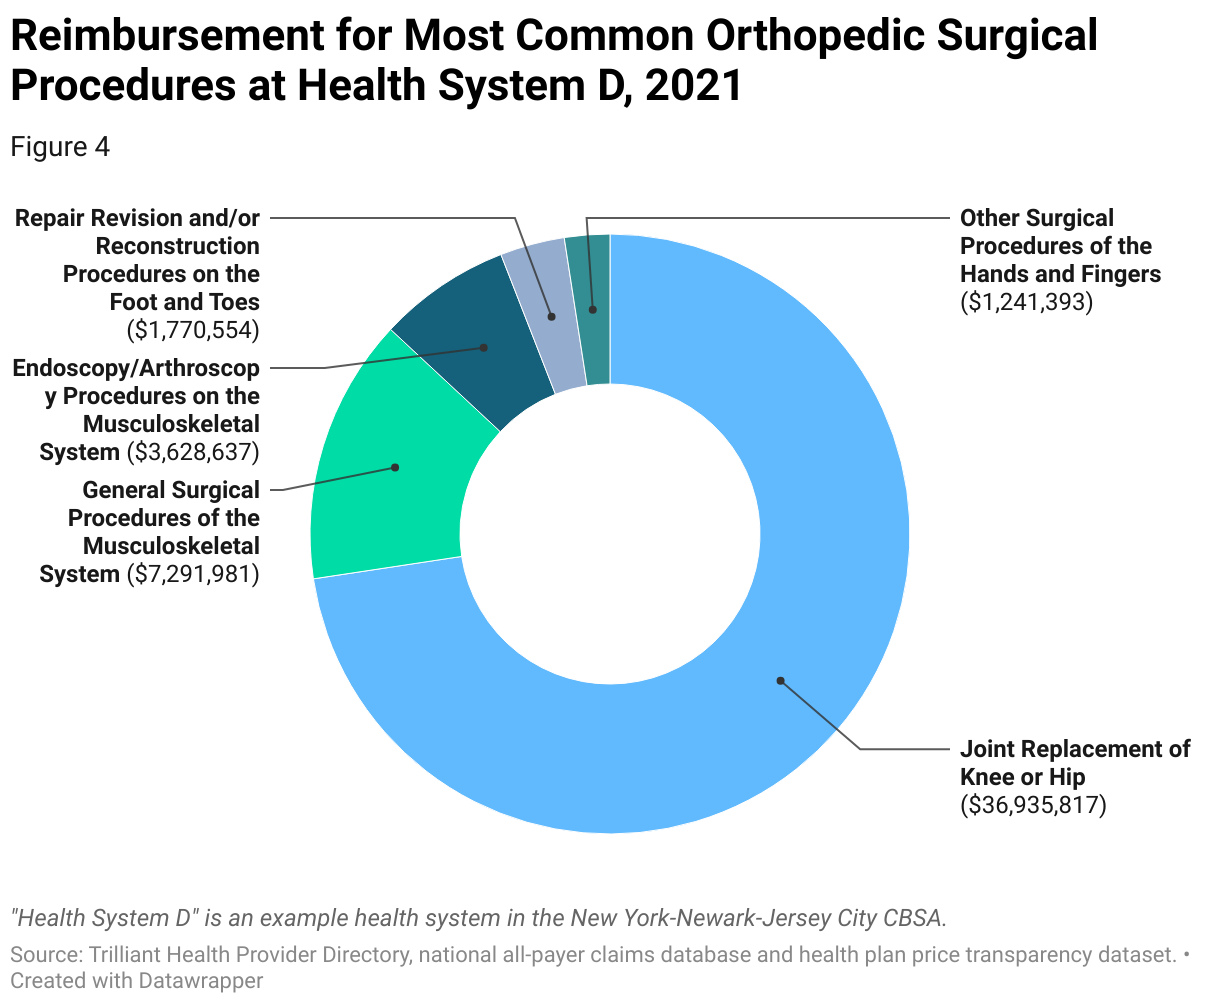 Donut chart showing reimbursements for the most common orthopedic surgical procedures at an example health system in the New York-Newark-Jersey City CBSA.